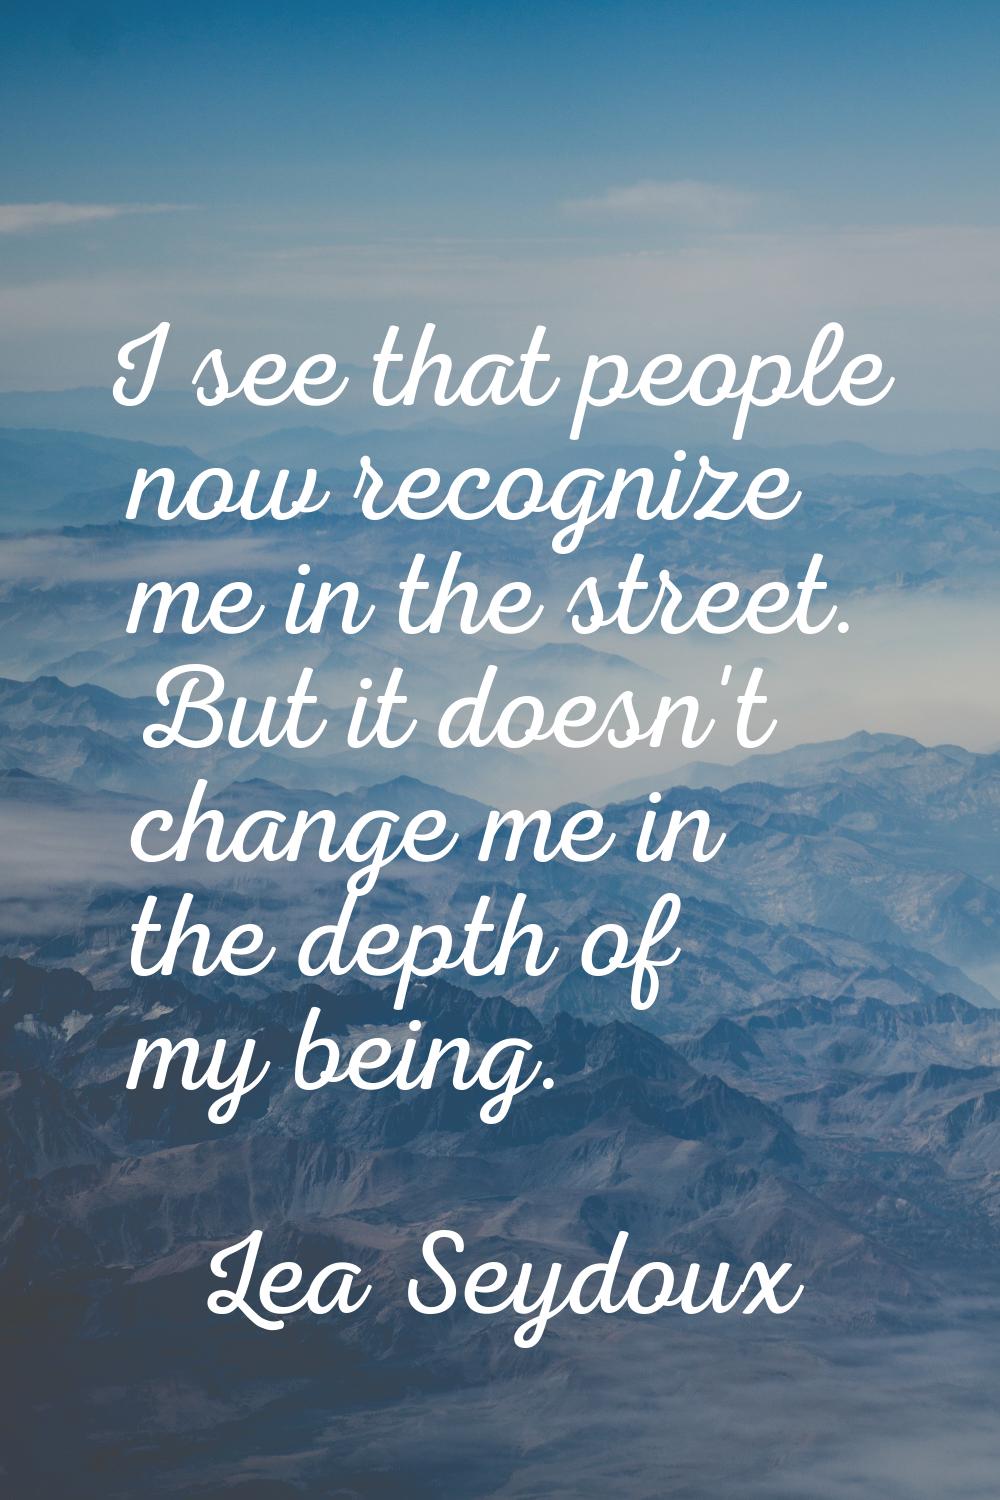 I see that people now recognize me in the street. But it doesn't change me in the depth of my being